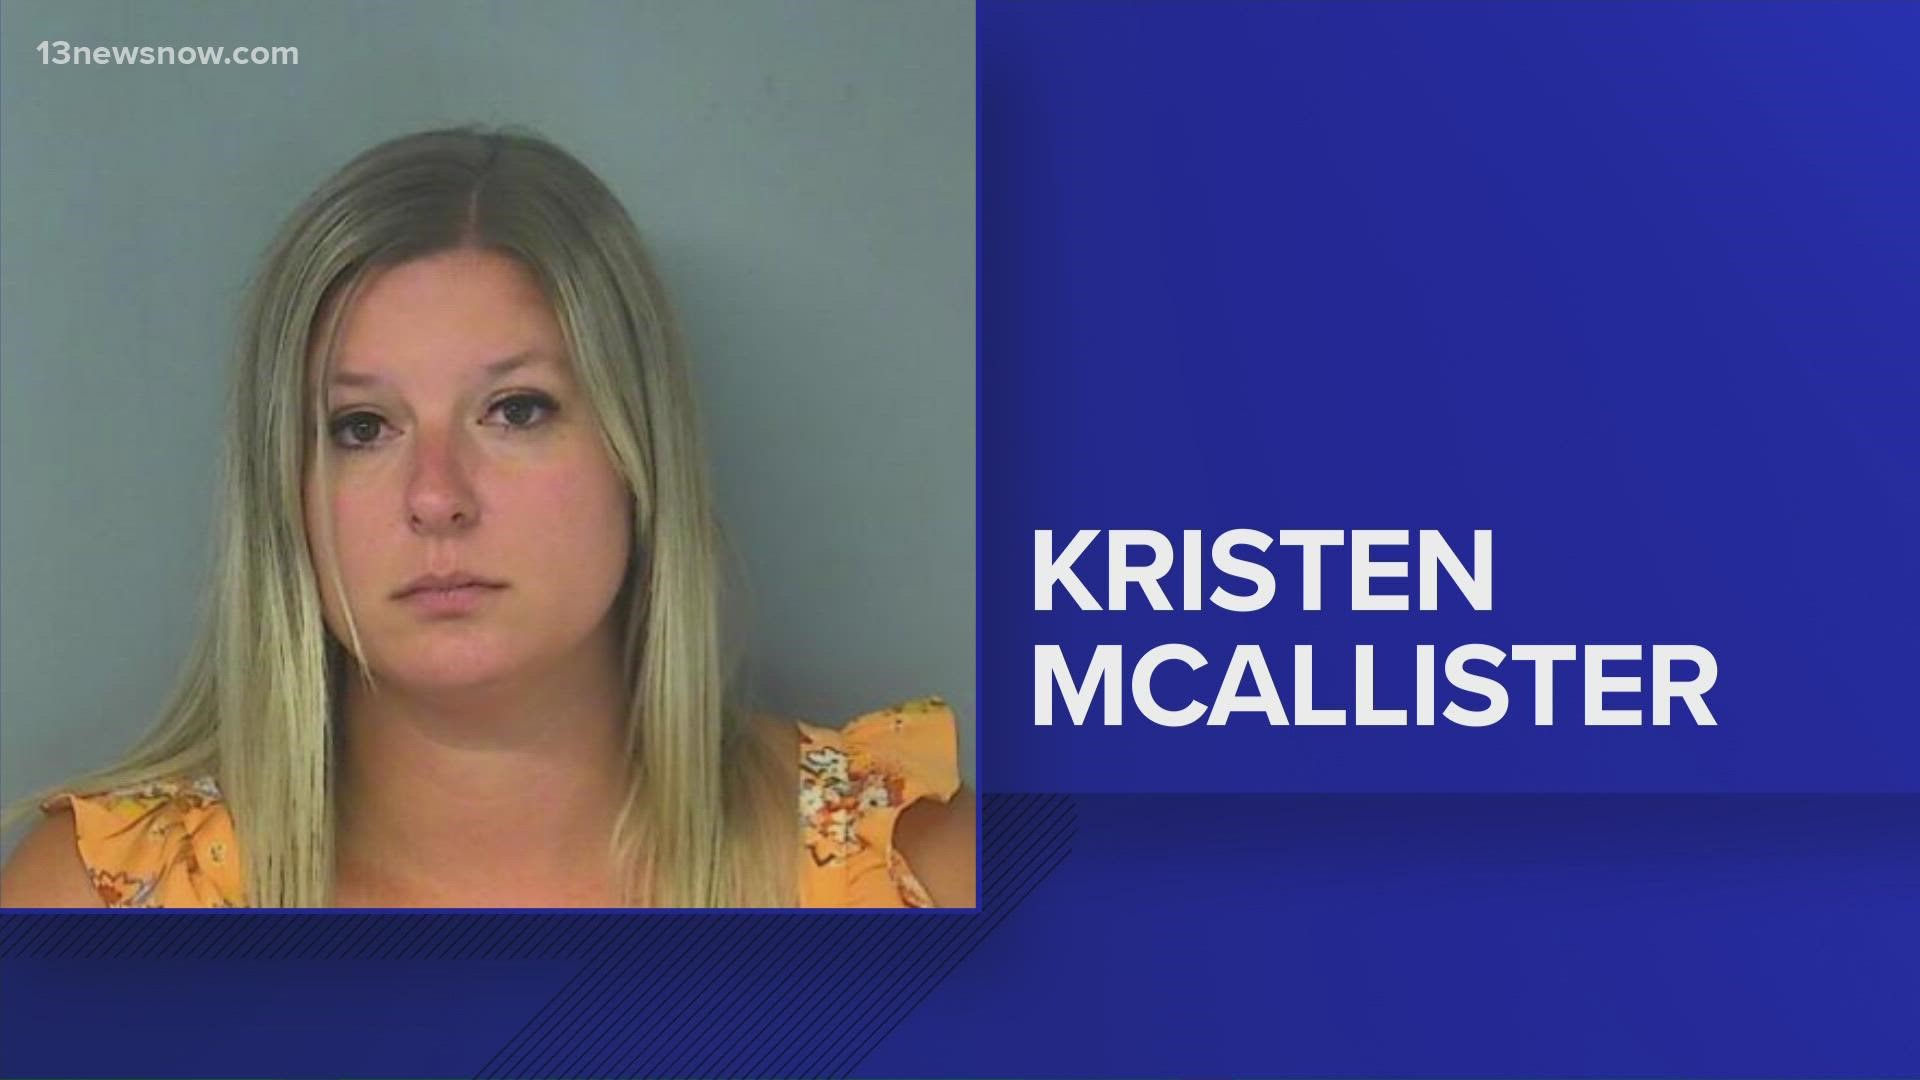 The York-Poquoson Sheriff's Office said someone reported that Kristen McAllister, 32, had an inappropriate relationship with a student dating back to late 2021.